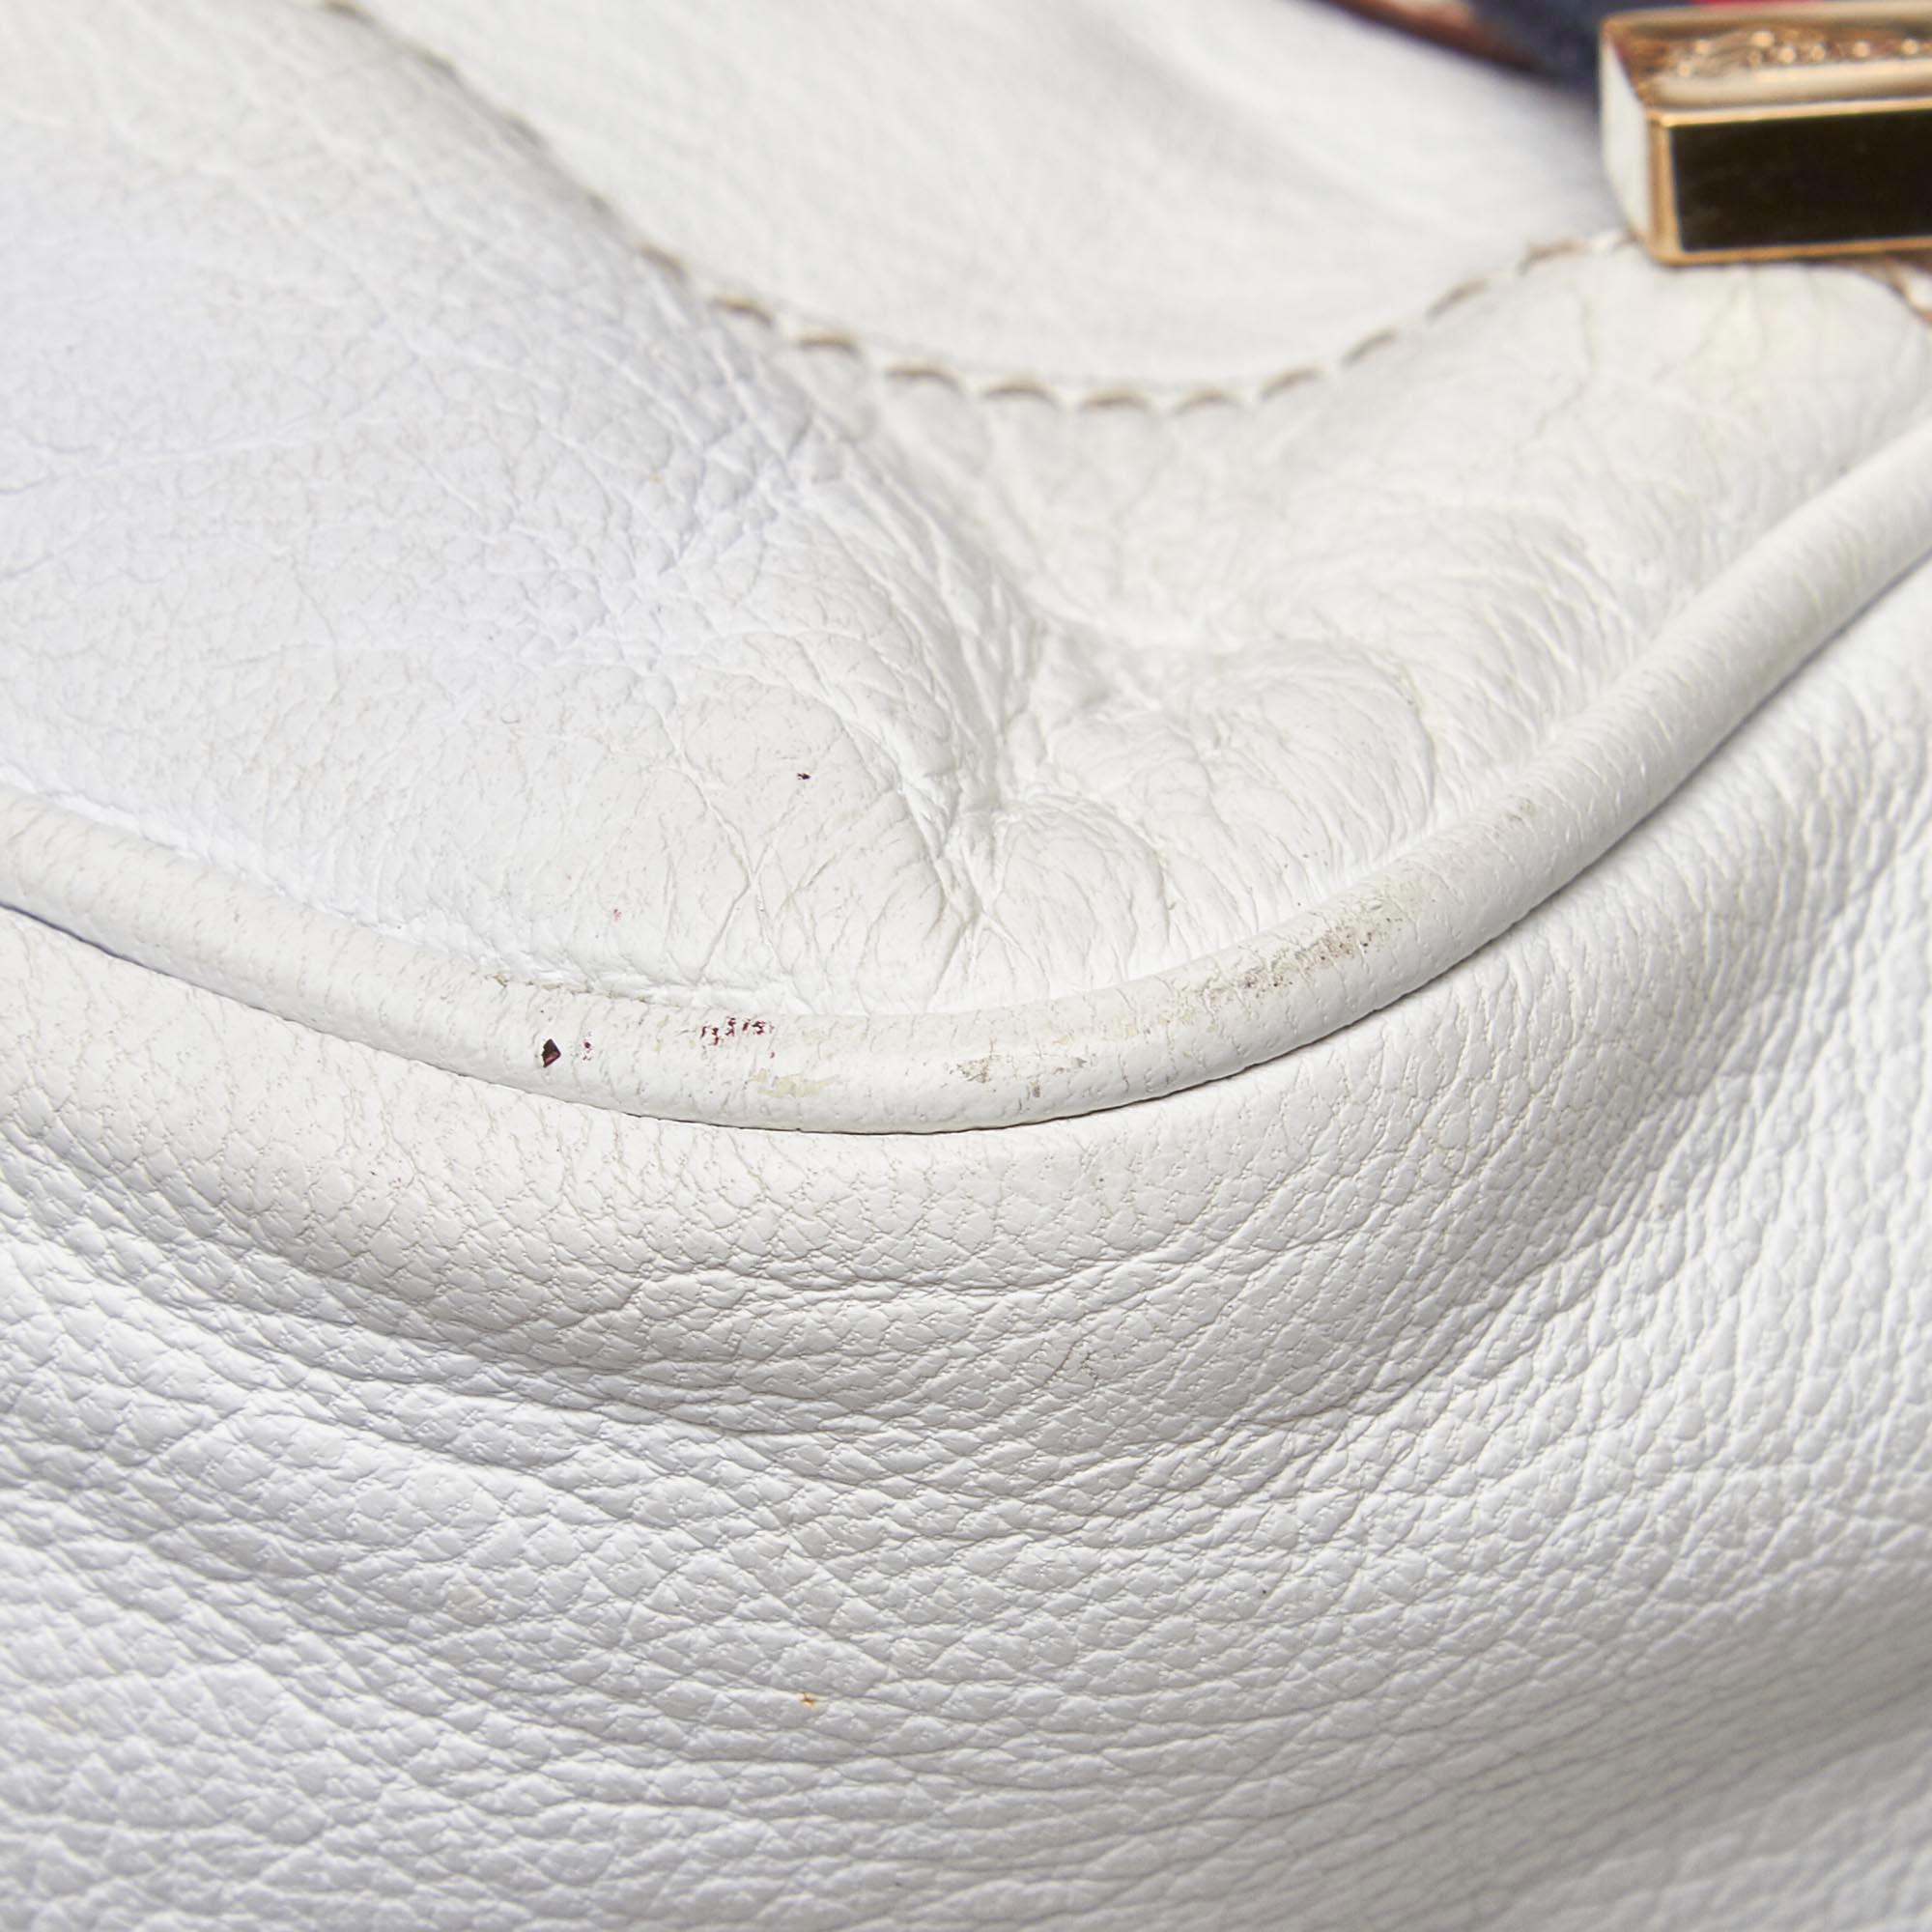 Vintage Authentic Gucci White Leather Princy Shoulder Bag Italy MEDIUM  For Sale 5